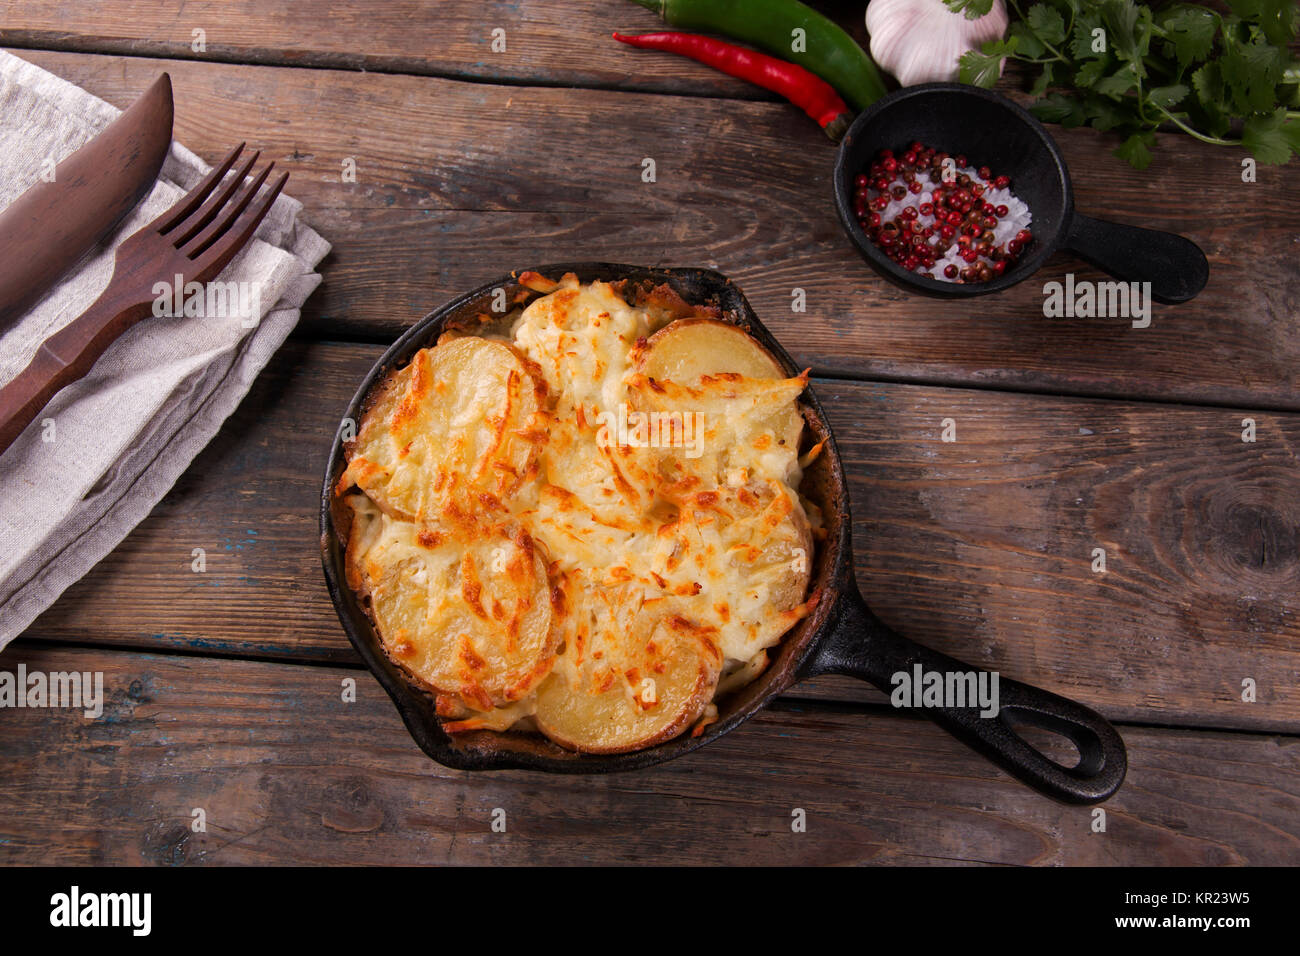 potato casserole with cheese in a frying pan serving vegetarian dish homemade Stock Photo